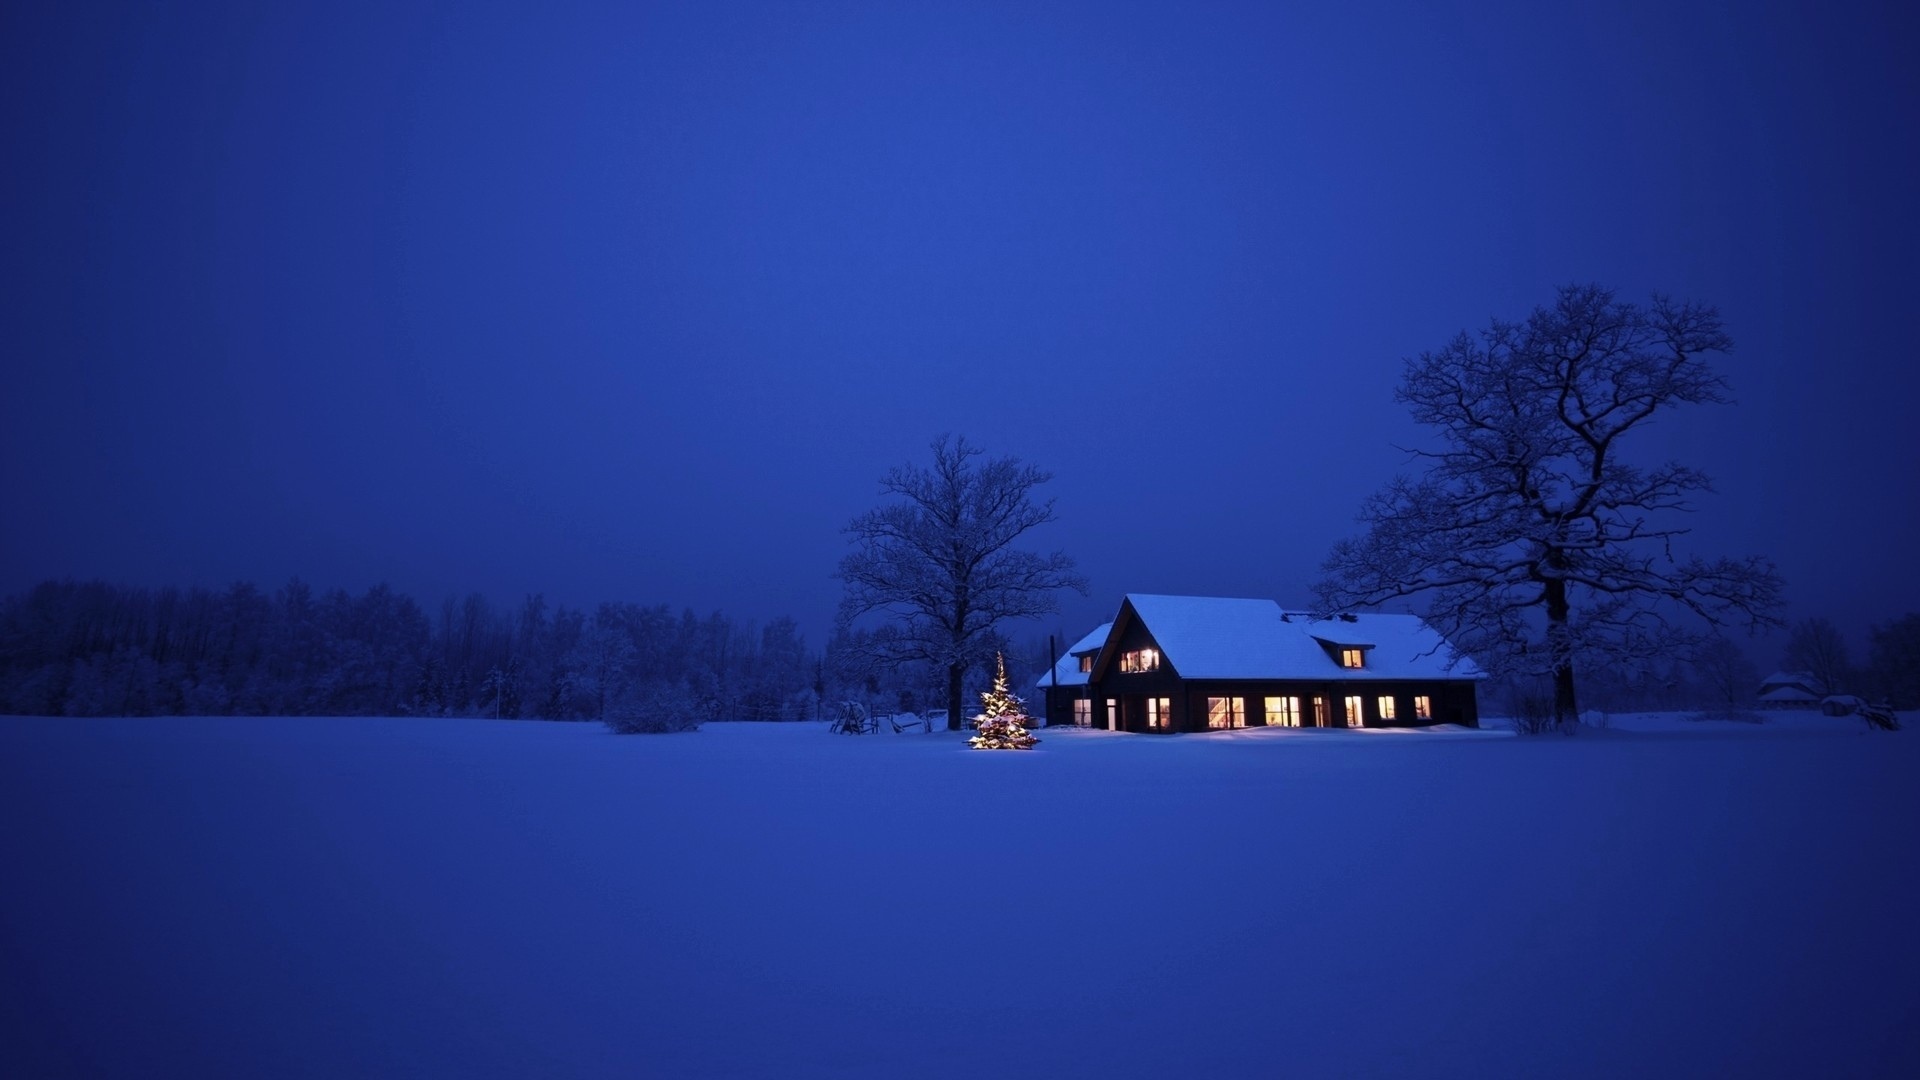 snow, christmas, xmas, new year, landscape, holidays, winter, houses, blue mobile wallpaper